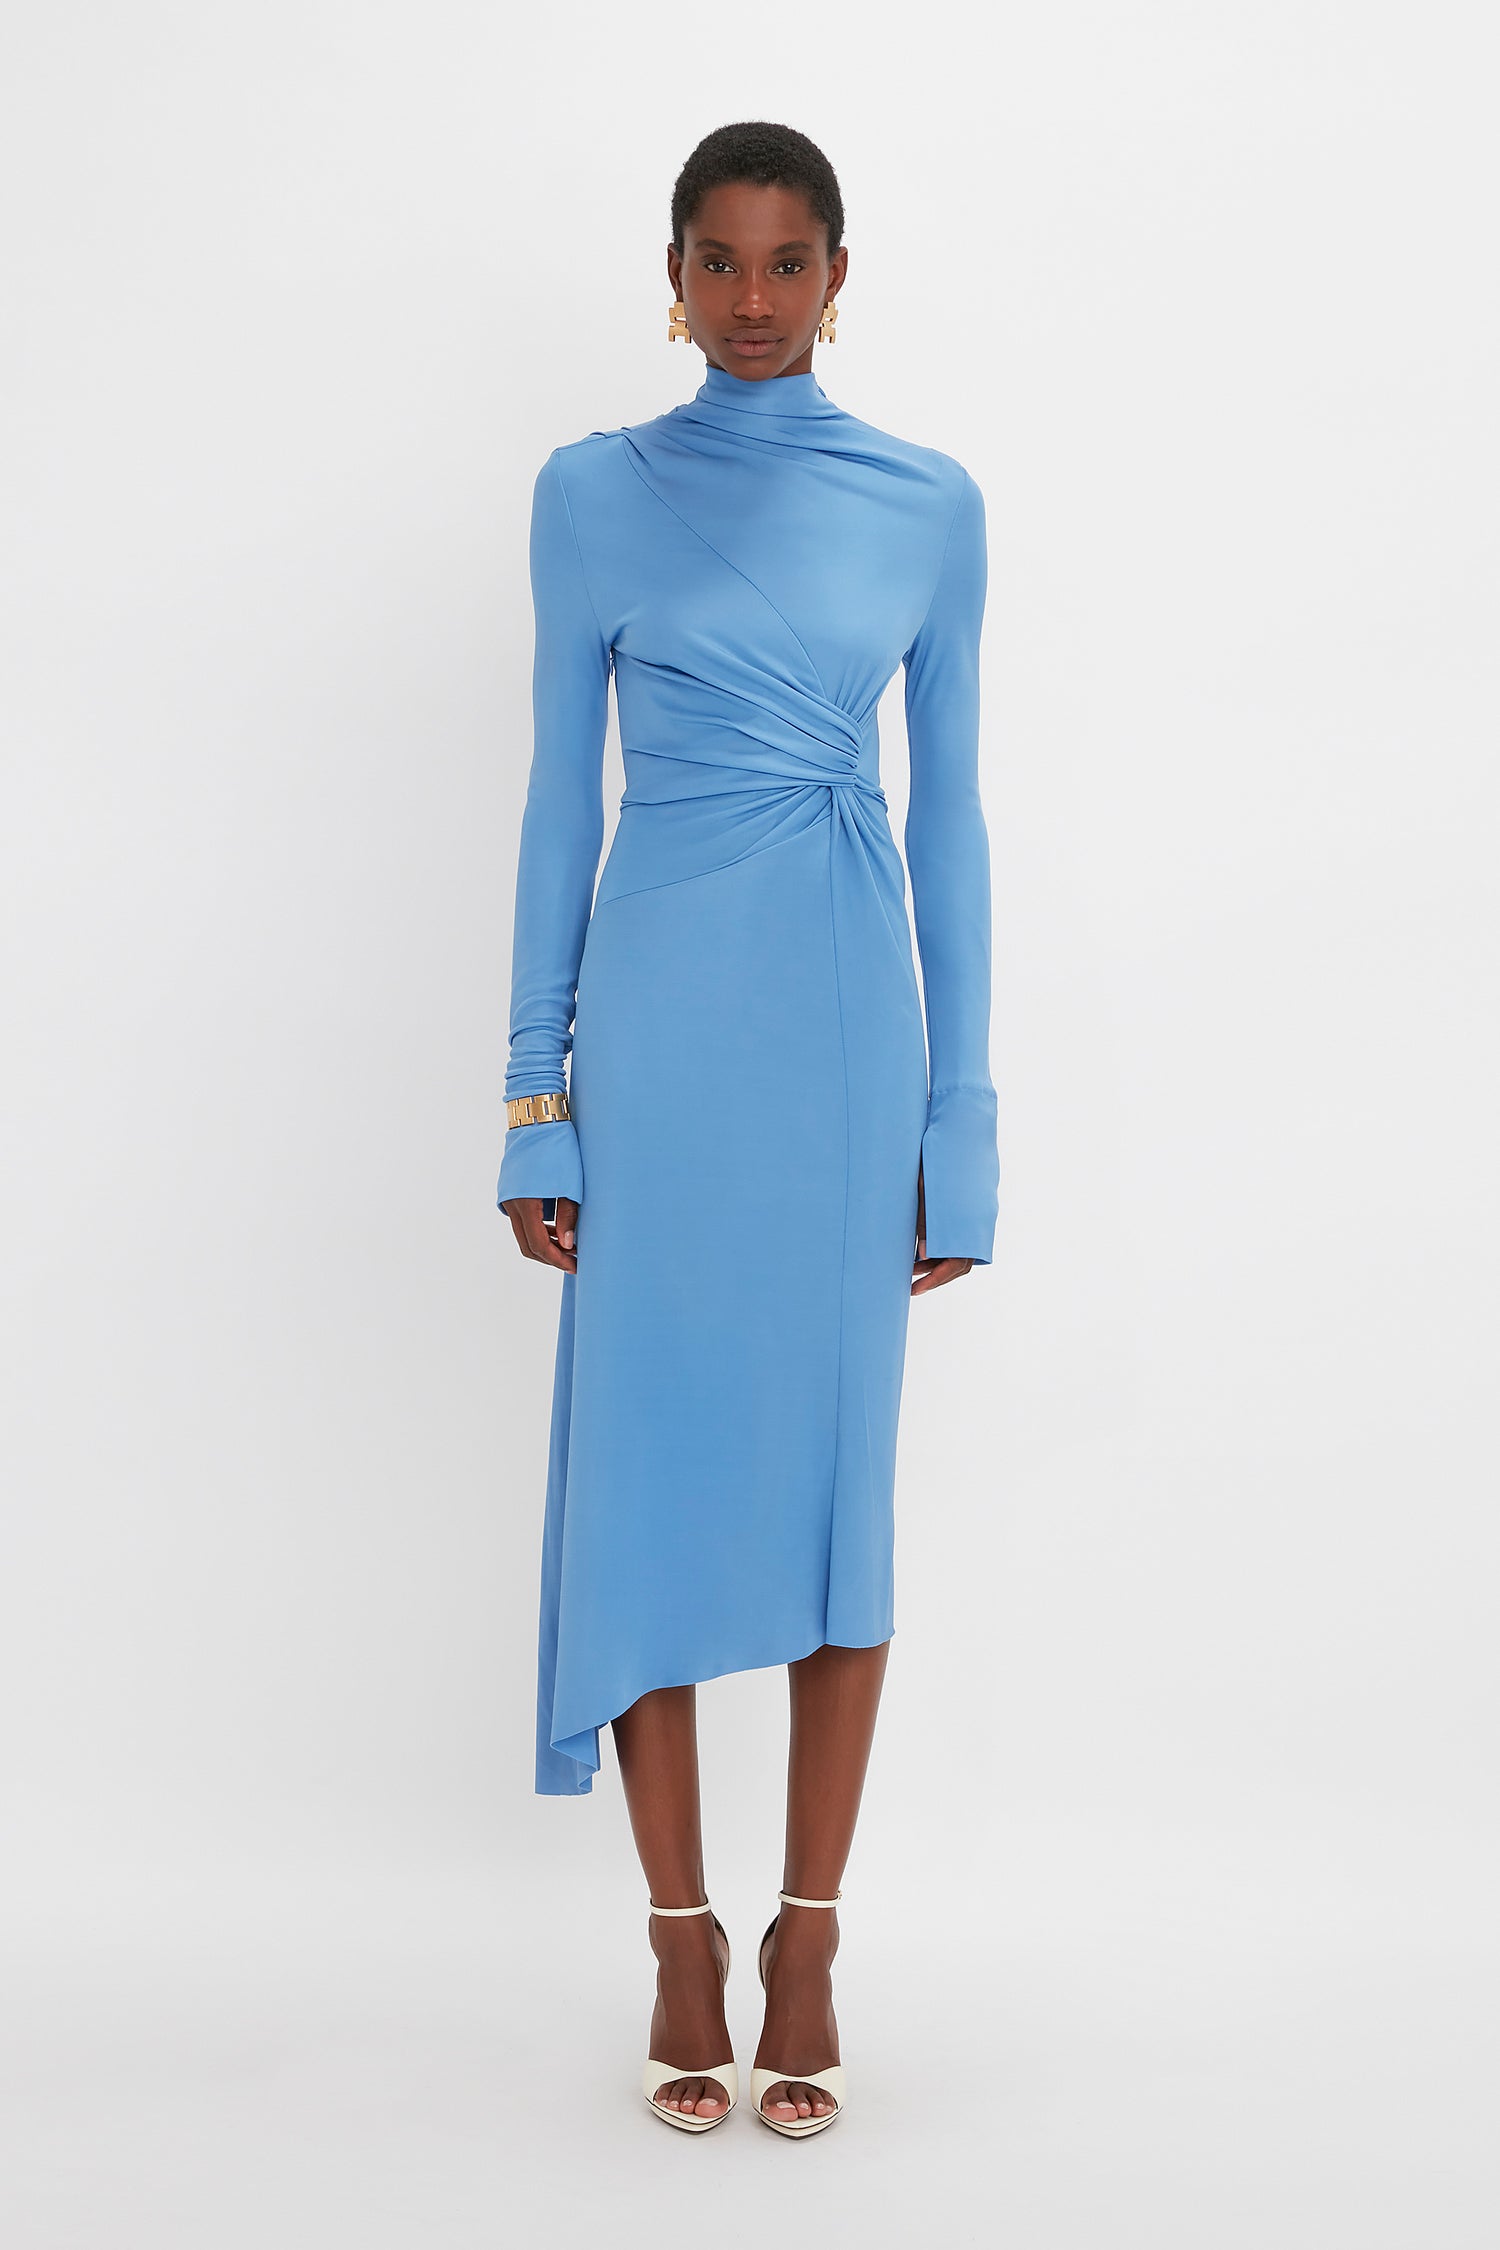 A woman in a Victoria Beckham High Neck Asymmetric Draped Dress In Oxford Blue with a twist detail at the waist, standing against a white background.